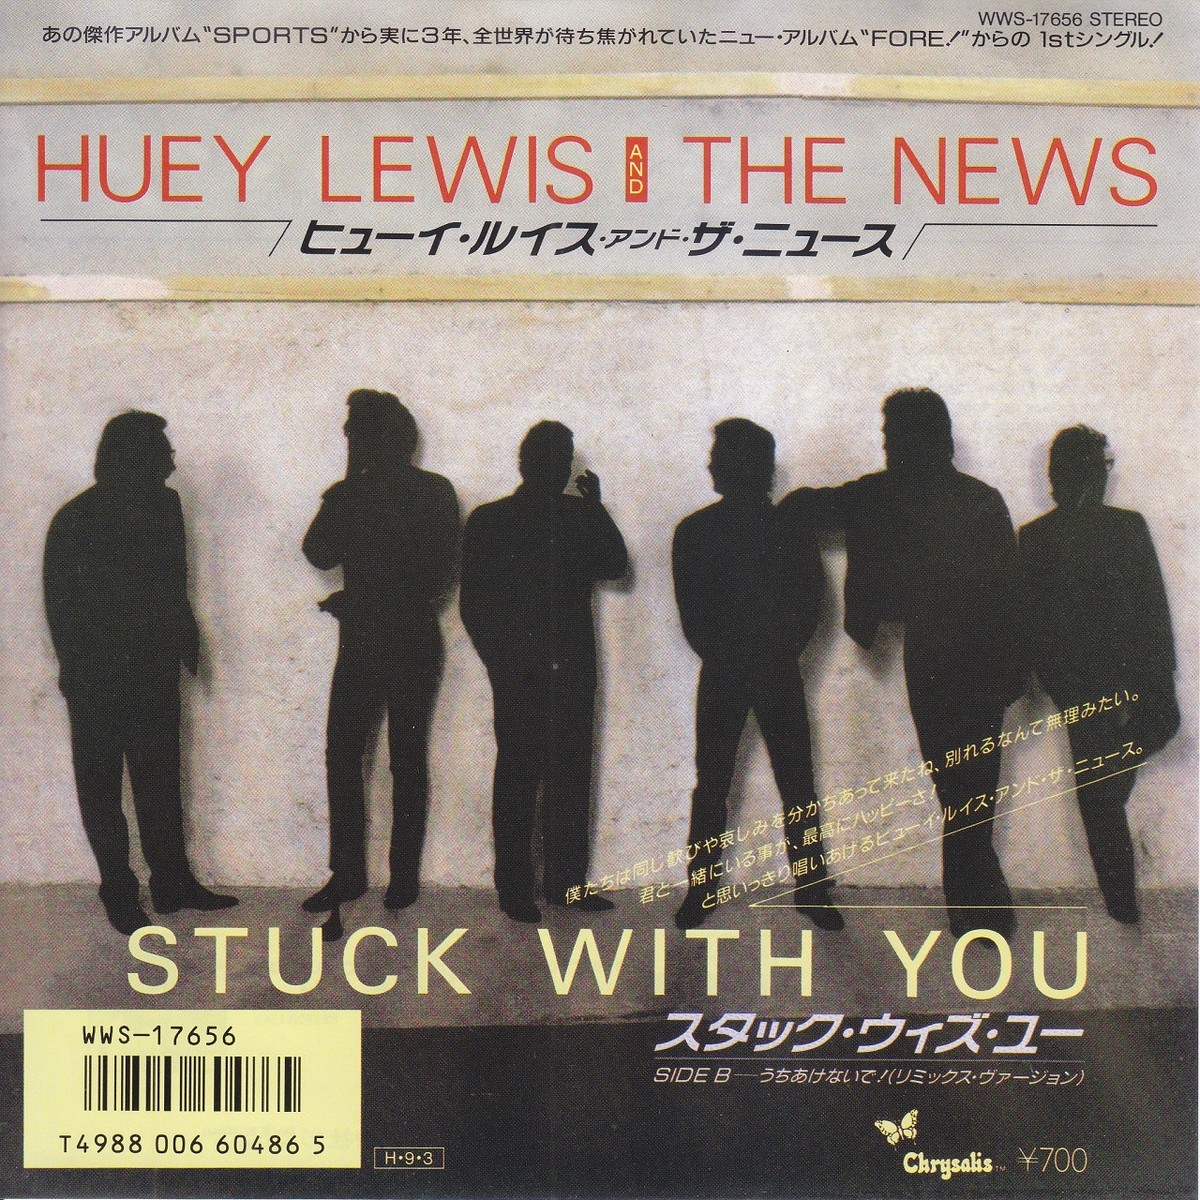 7inch Huey Lewis And The News Stuck With You スタック ウィズ ユー ヒューイ ルイスアンド ザ ニュース 1986 07 45rpm 45rpm